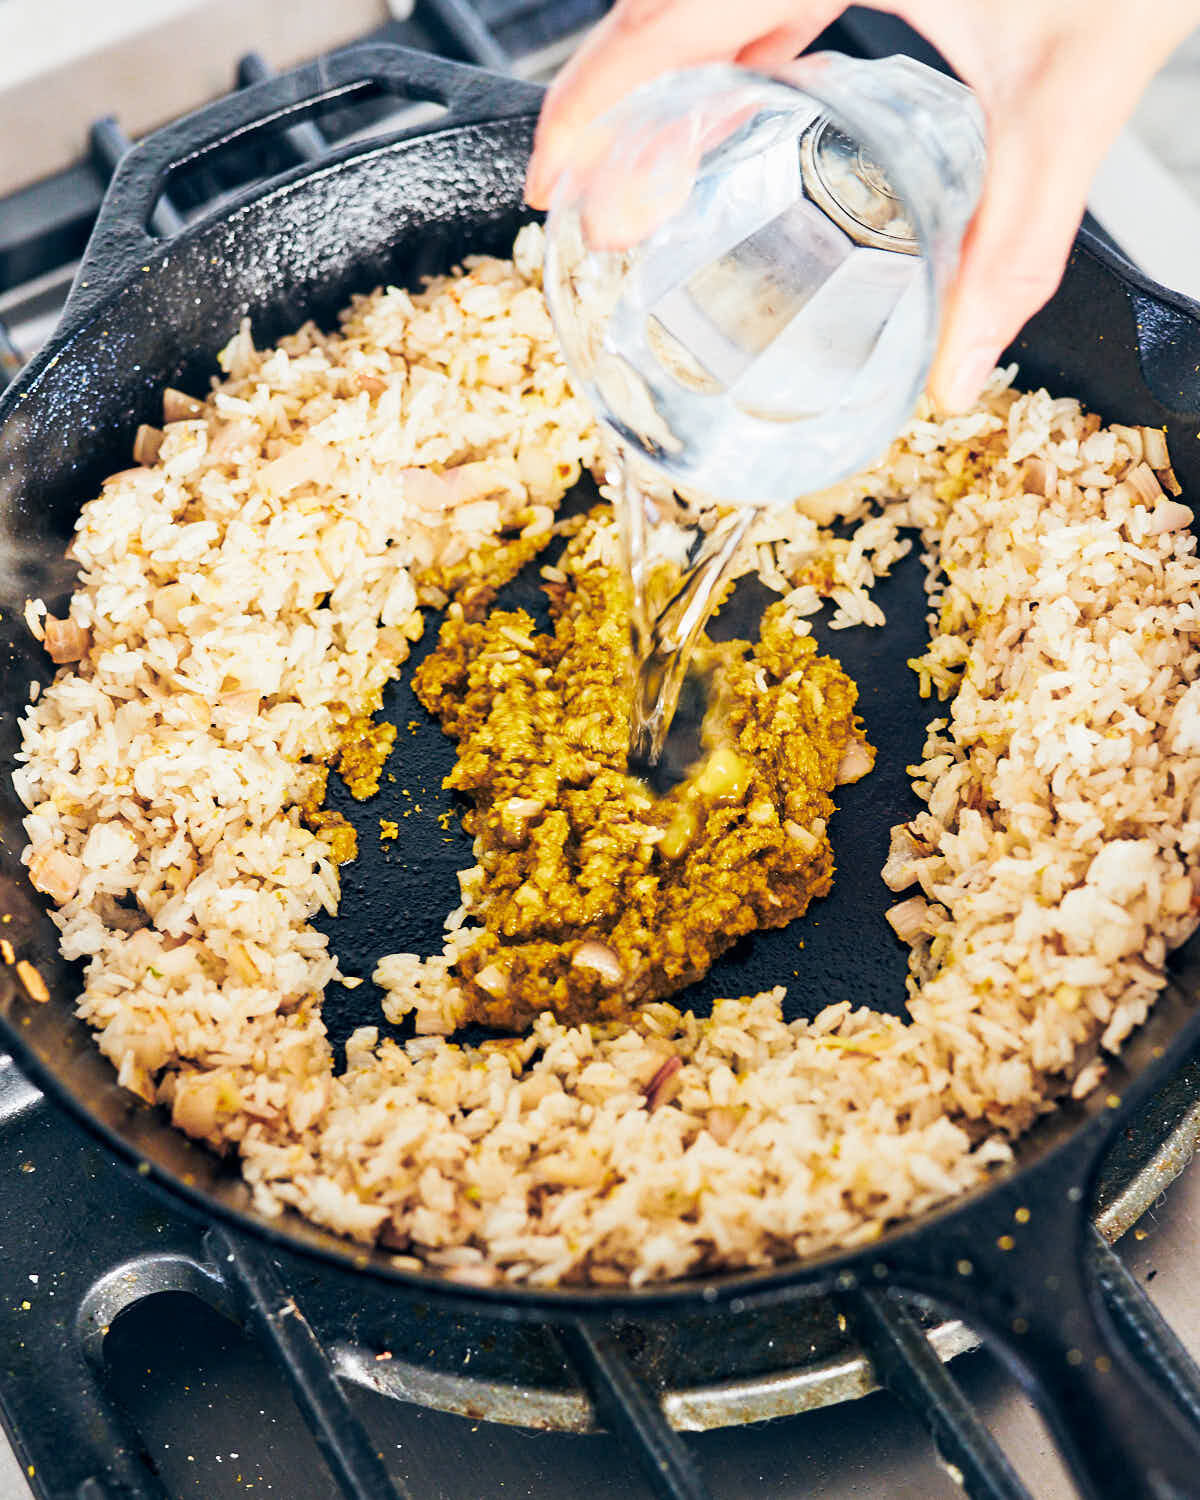 Green curry paste and water being cooked in a skillet with vegan fried rice.